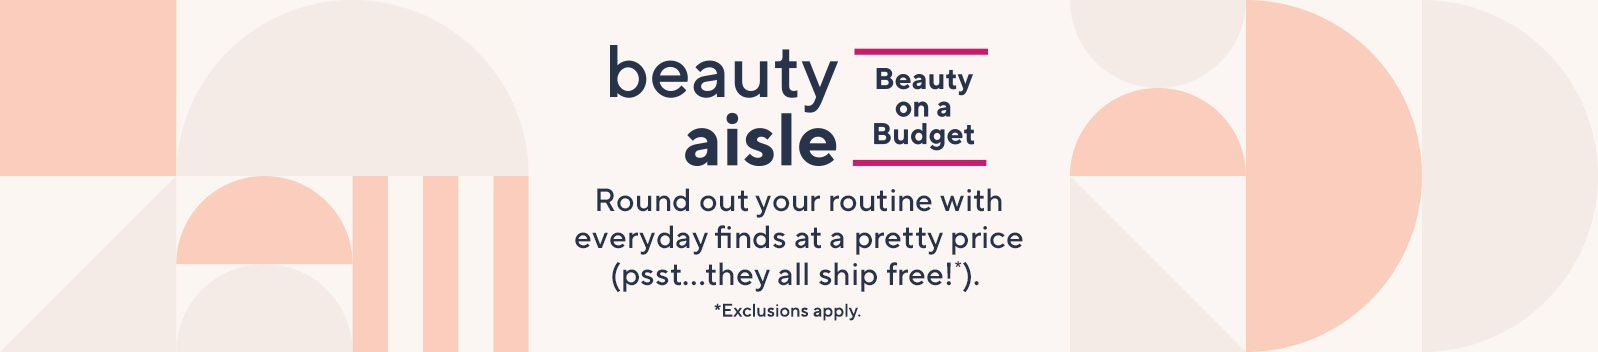 Beauty on a Budget. Round out your routine with everyday finds at a pretty price (psst…they all ship free!*).  *Exclusions apply.